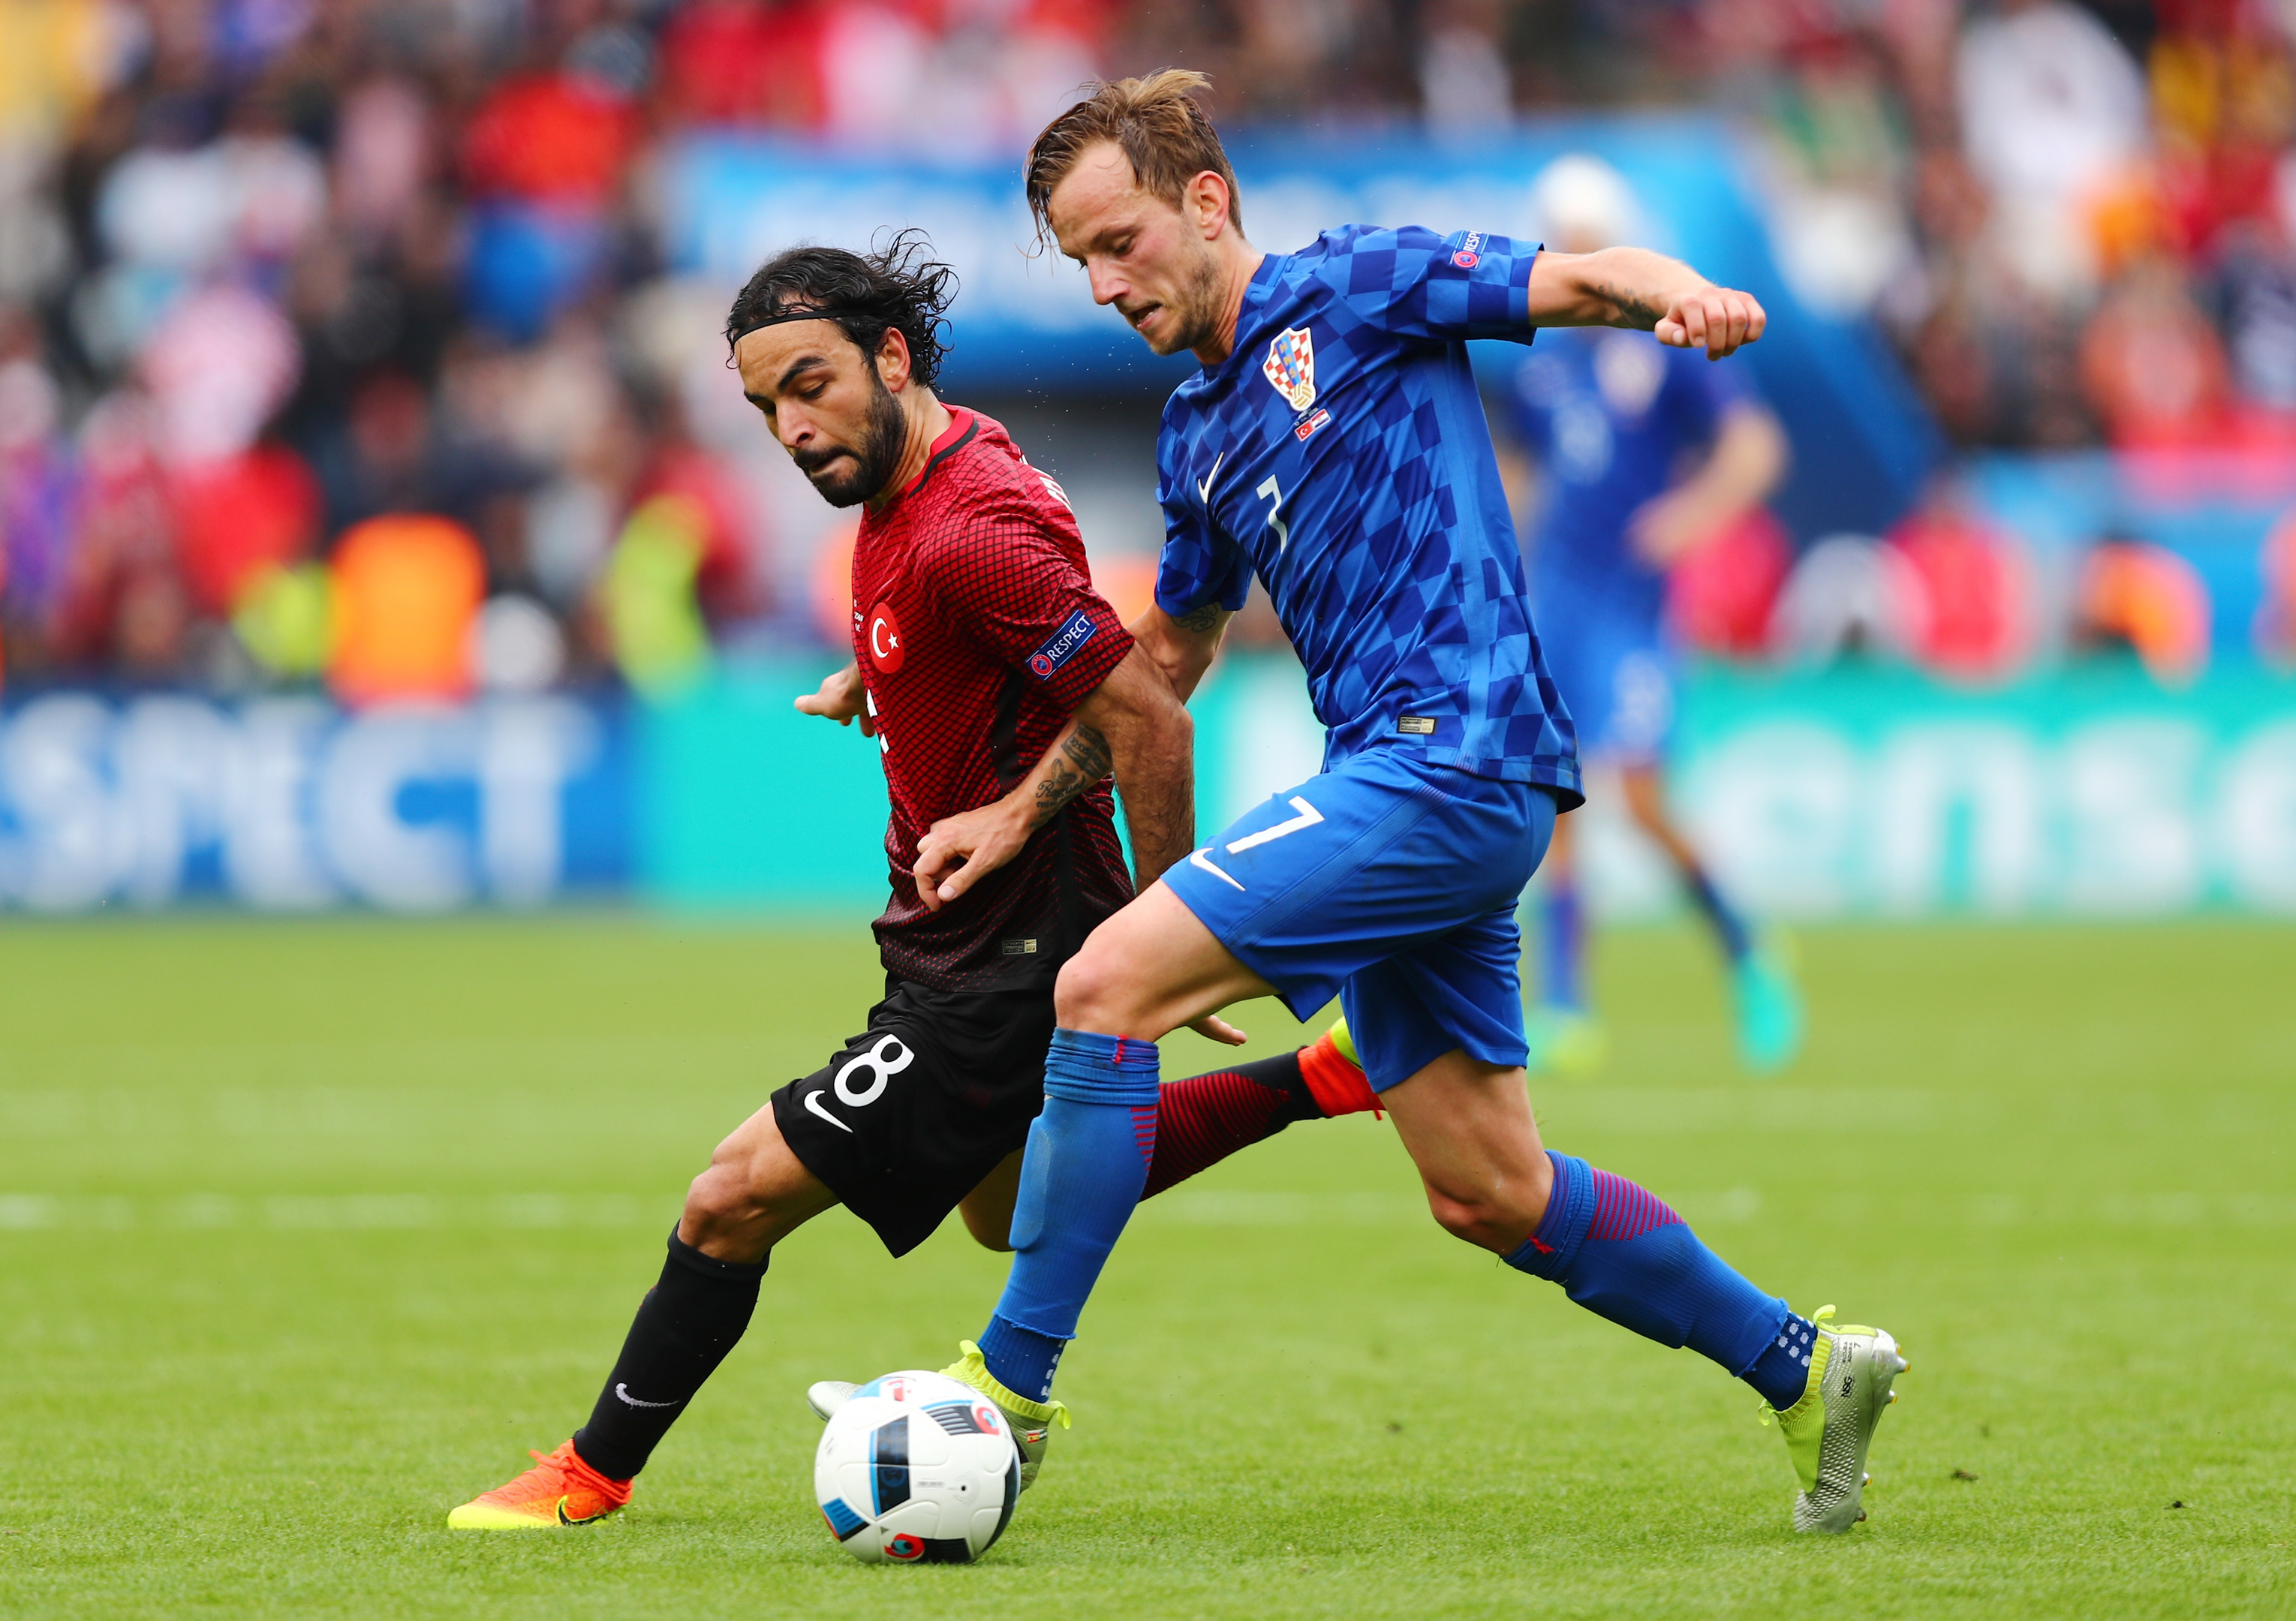 Ivan Rakitic of Croatia (in blue) and Selcuk Inan of Turkey compete for the ball during the UEFA EURO 2016 Group D match (Clive Rose/Getty Images)